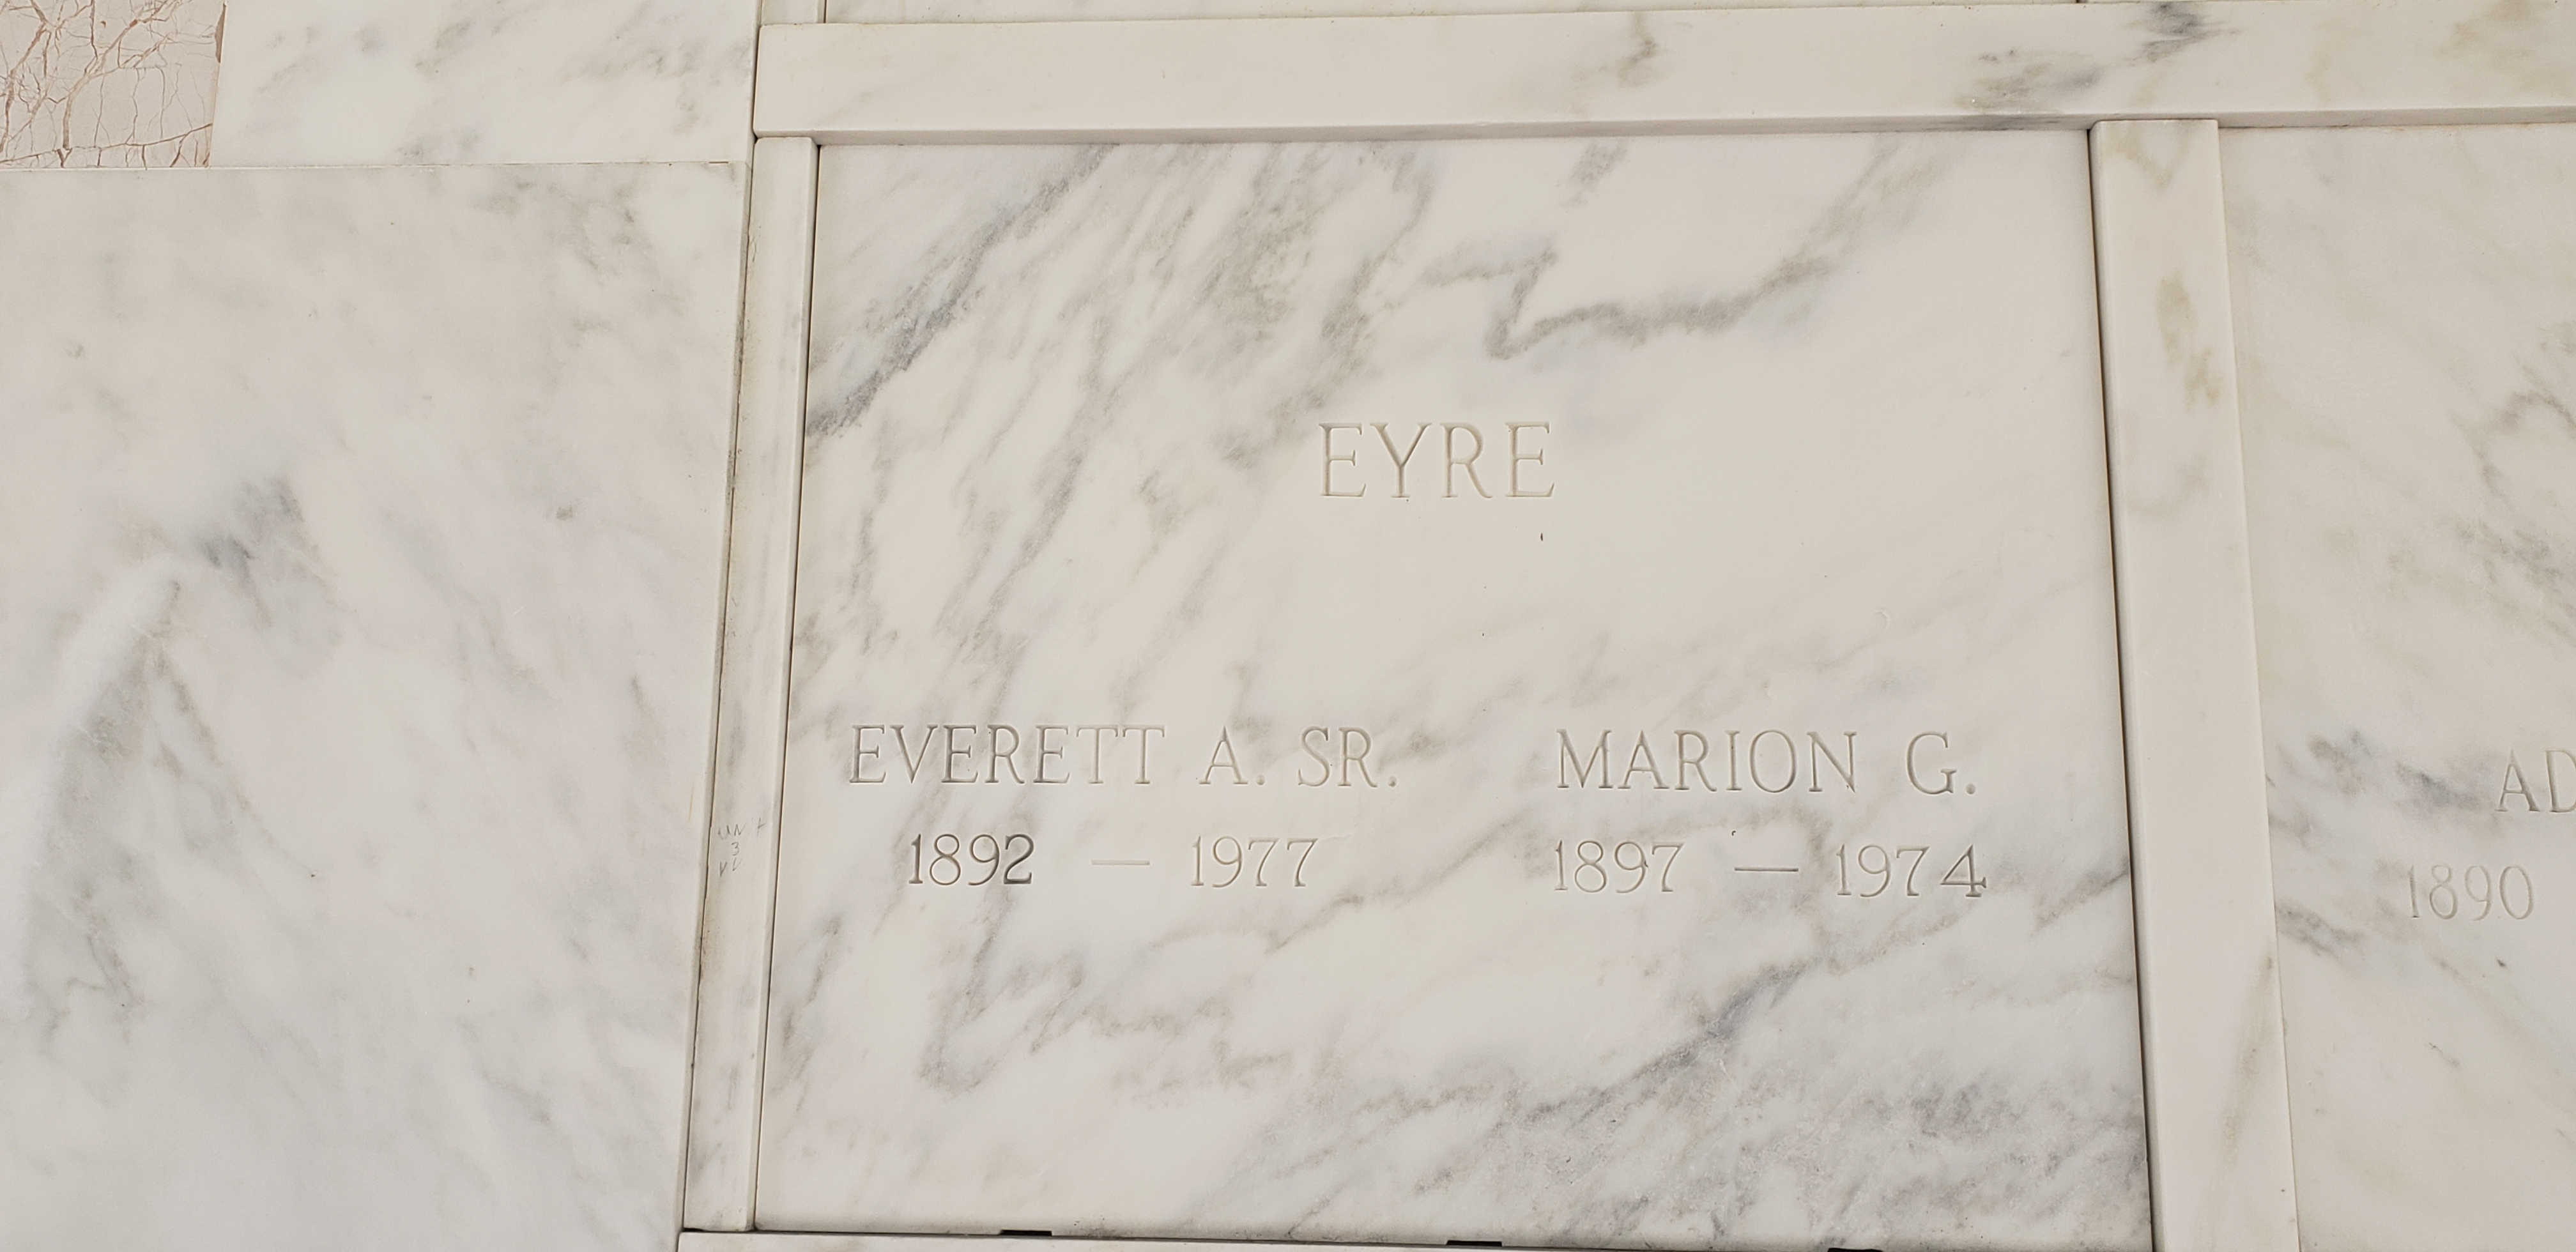 Marion Eyre